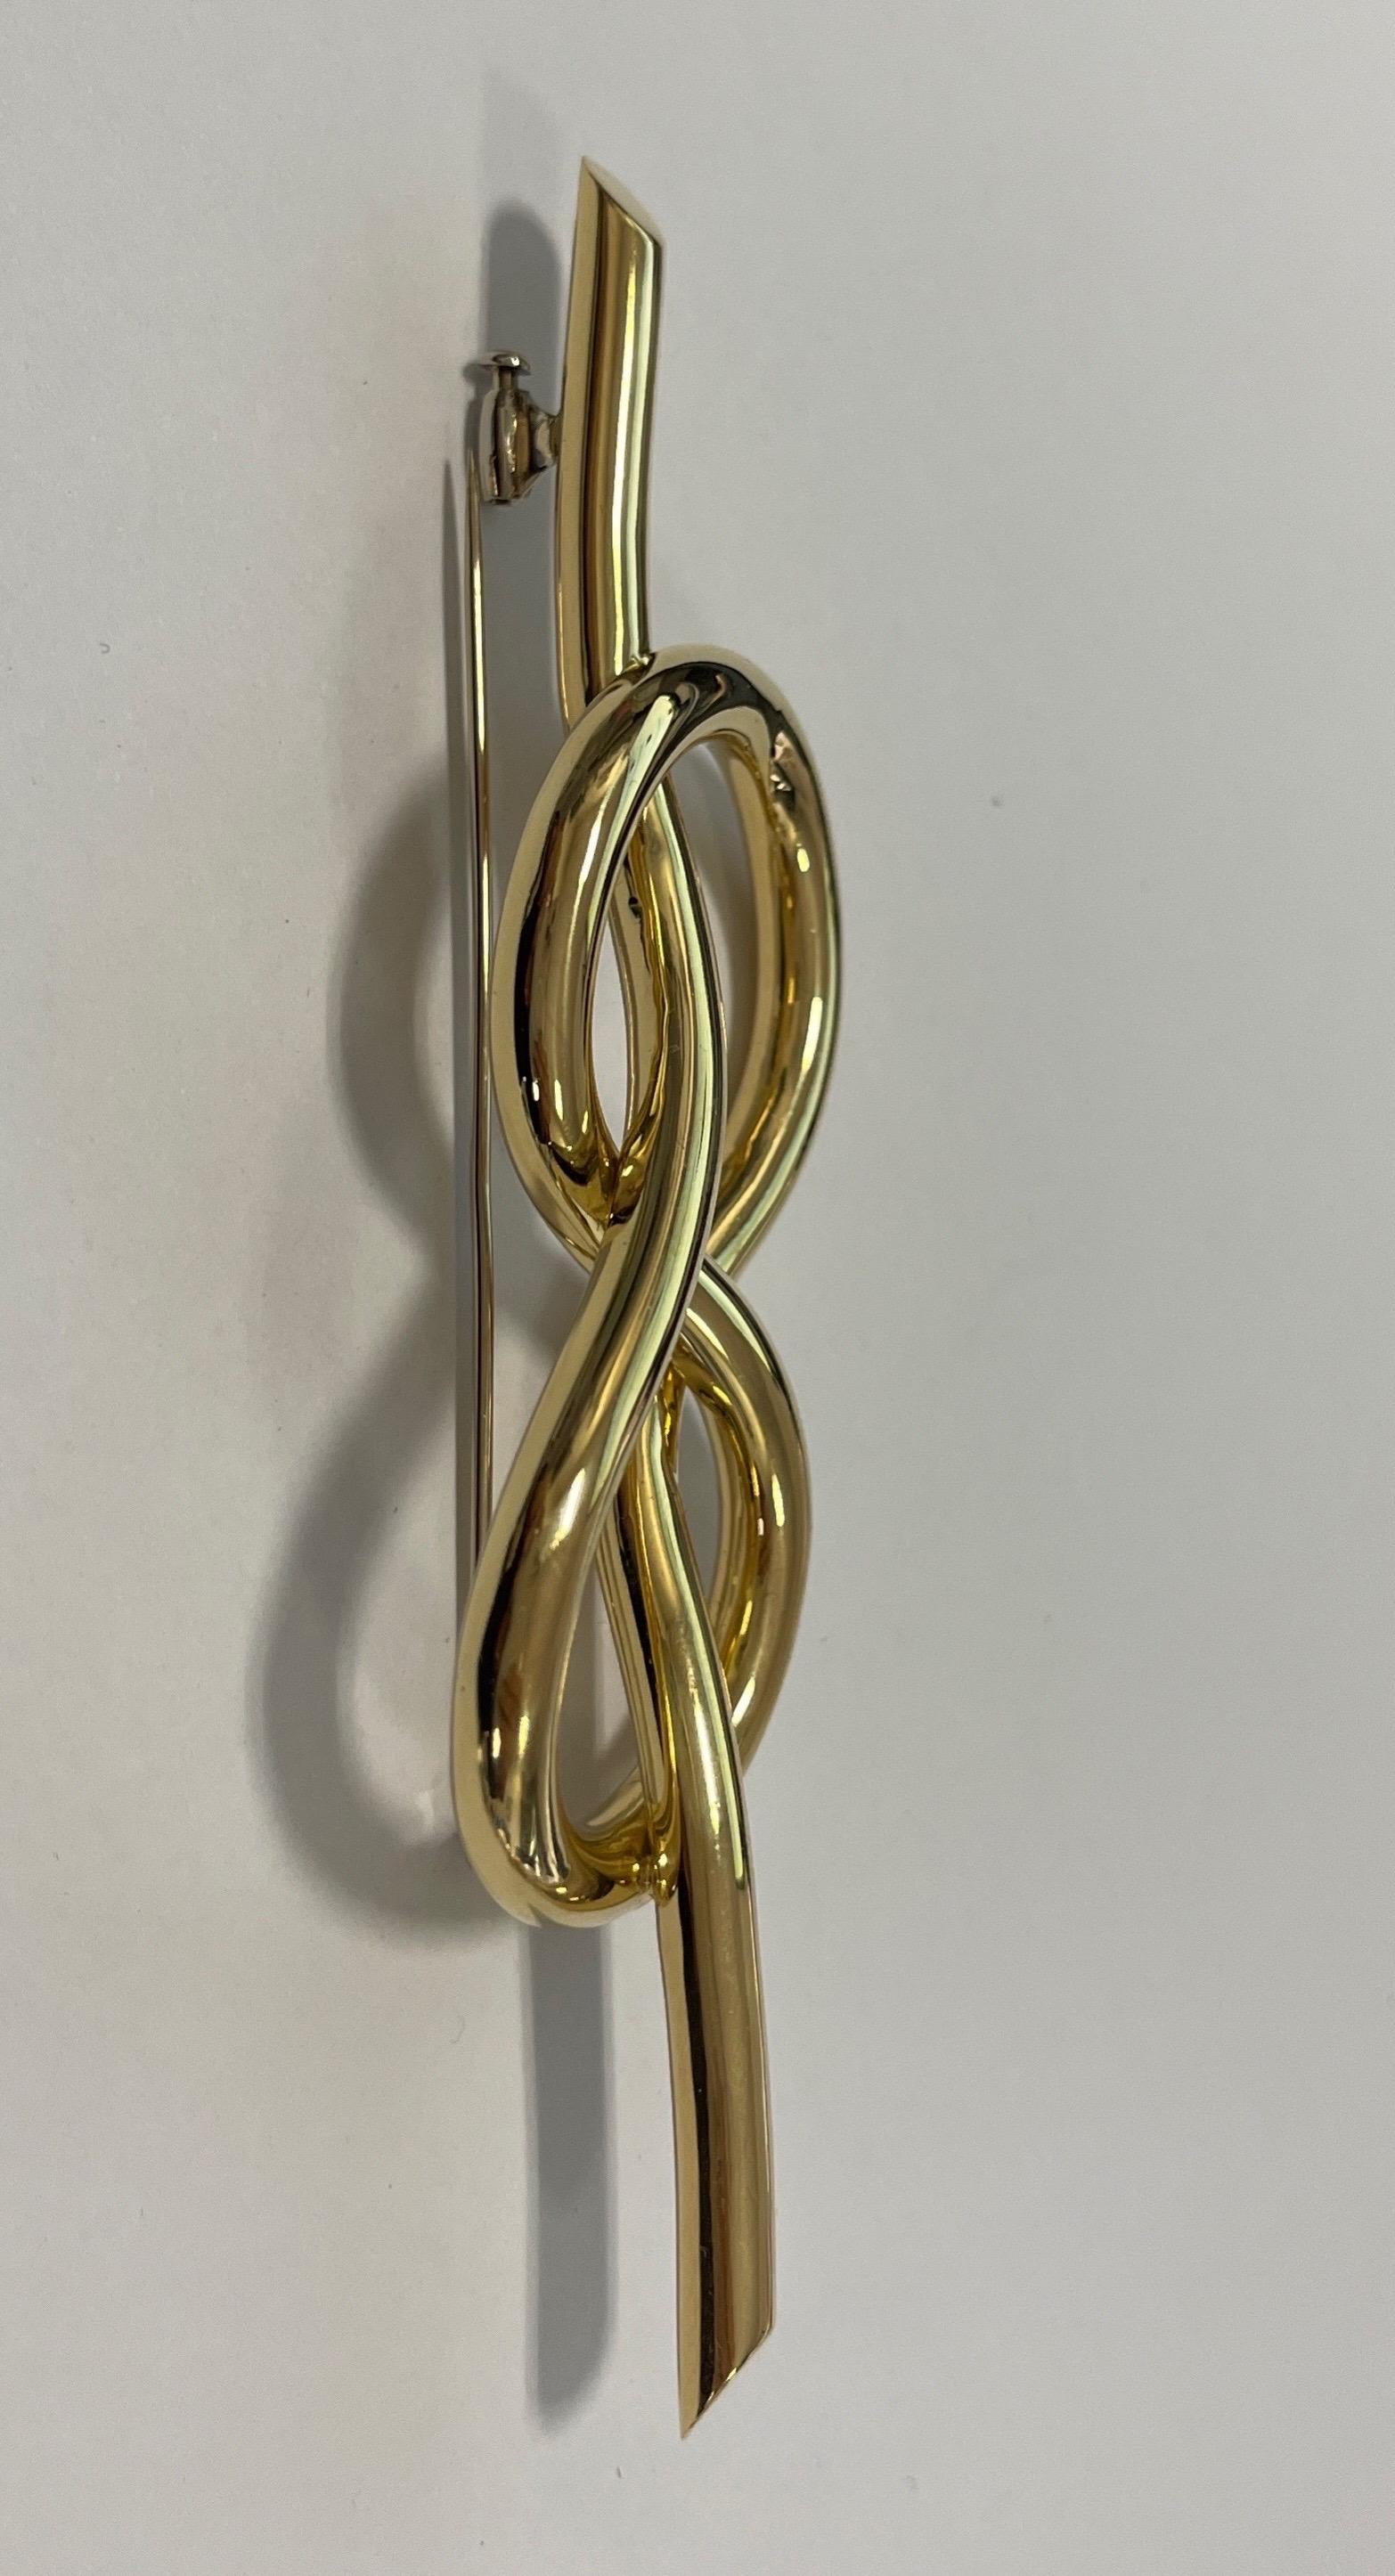 Mariner knot Brooch in Yellow Gold 18 Karat
The total weight of the gold is GR 29.80
Stamp 750 10 MI 